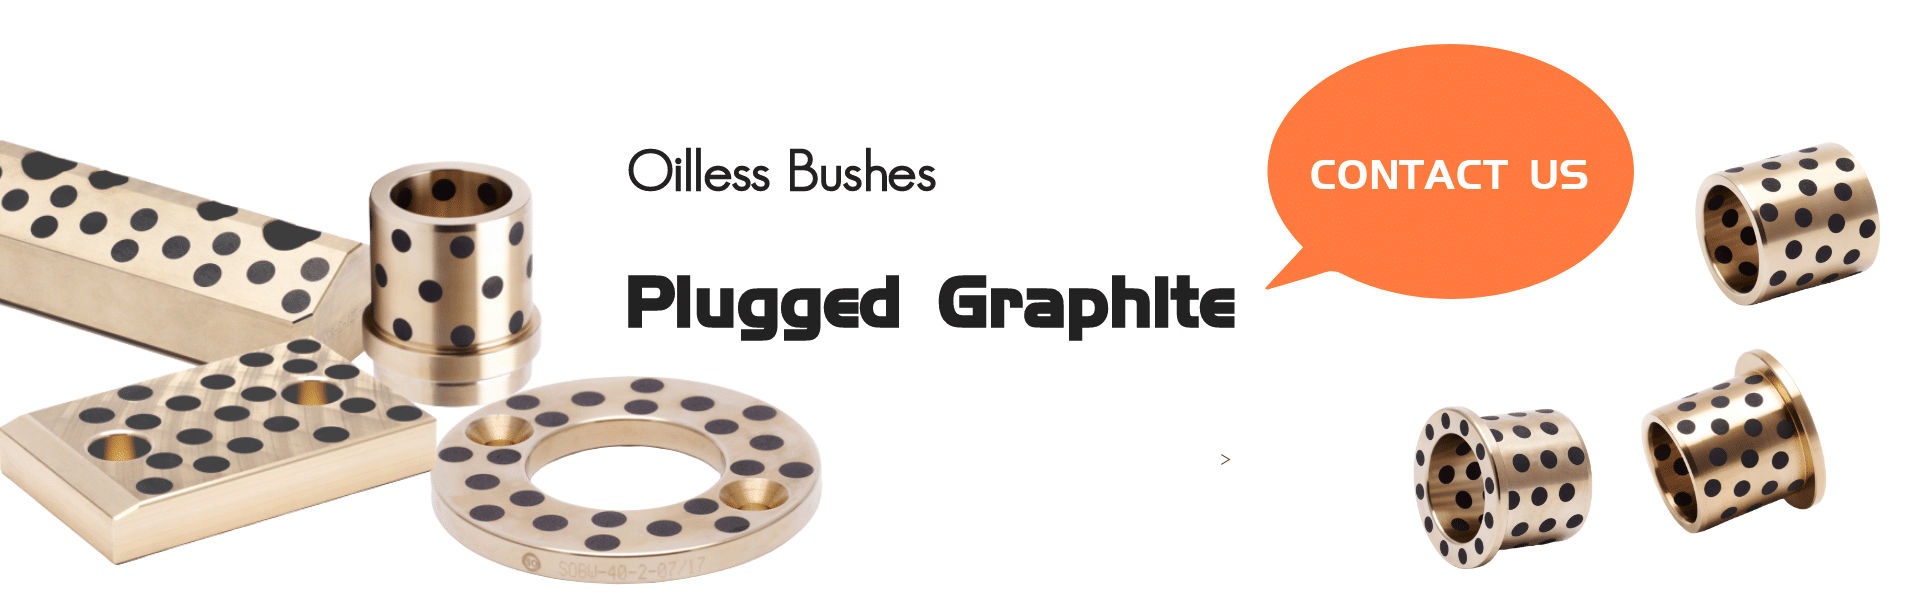 Oilless bushes